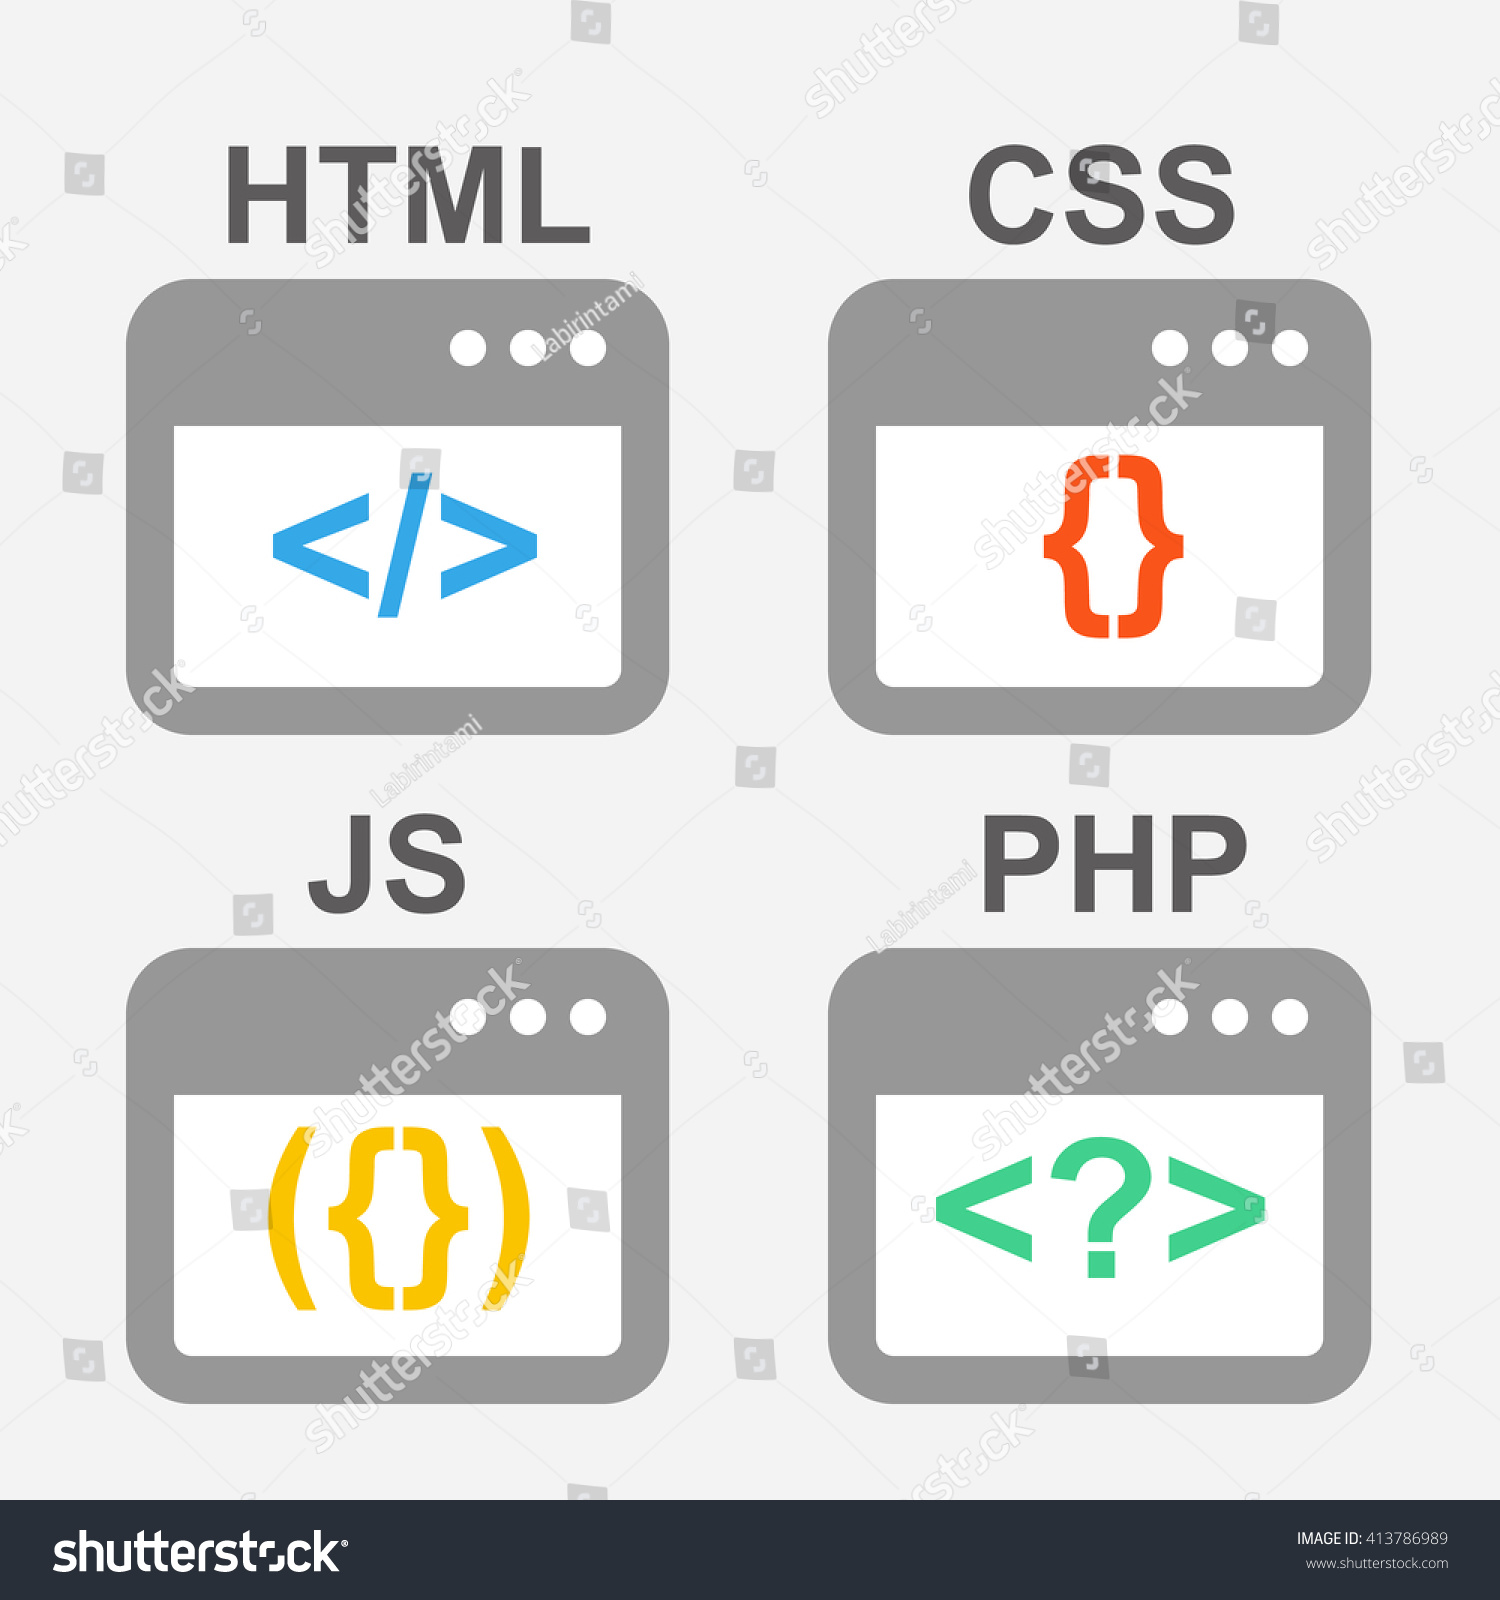 Html CSS js php